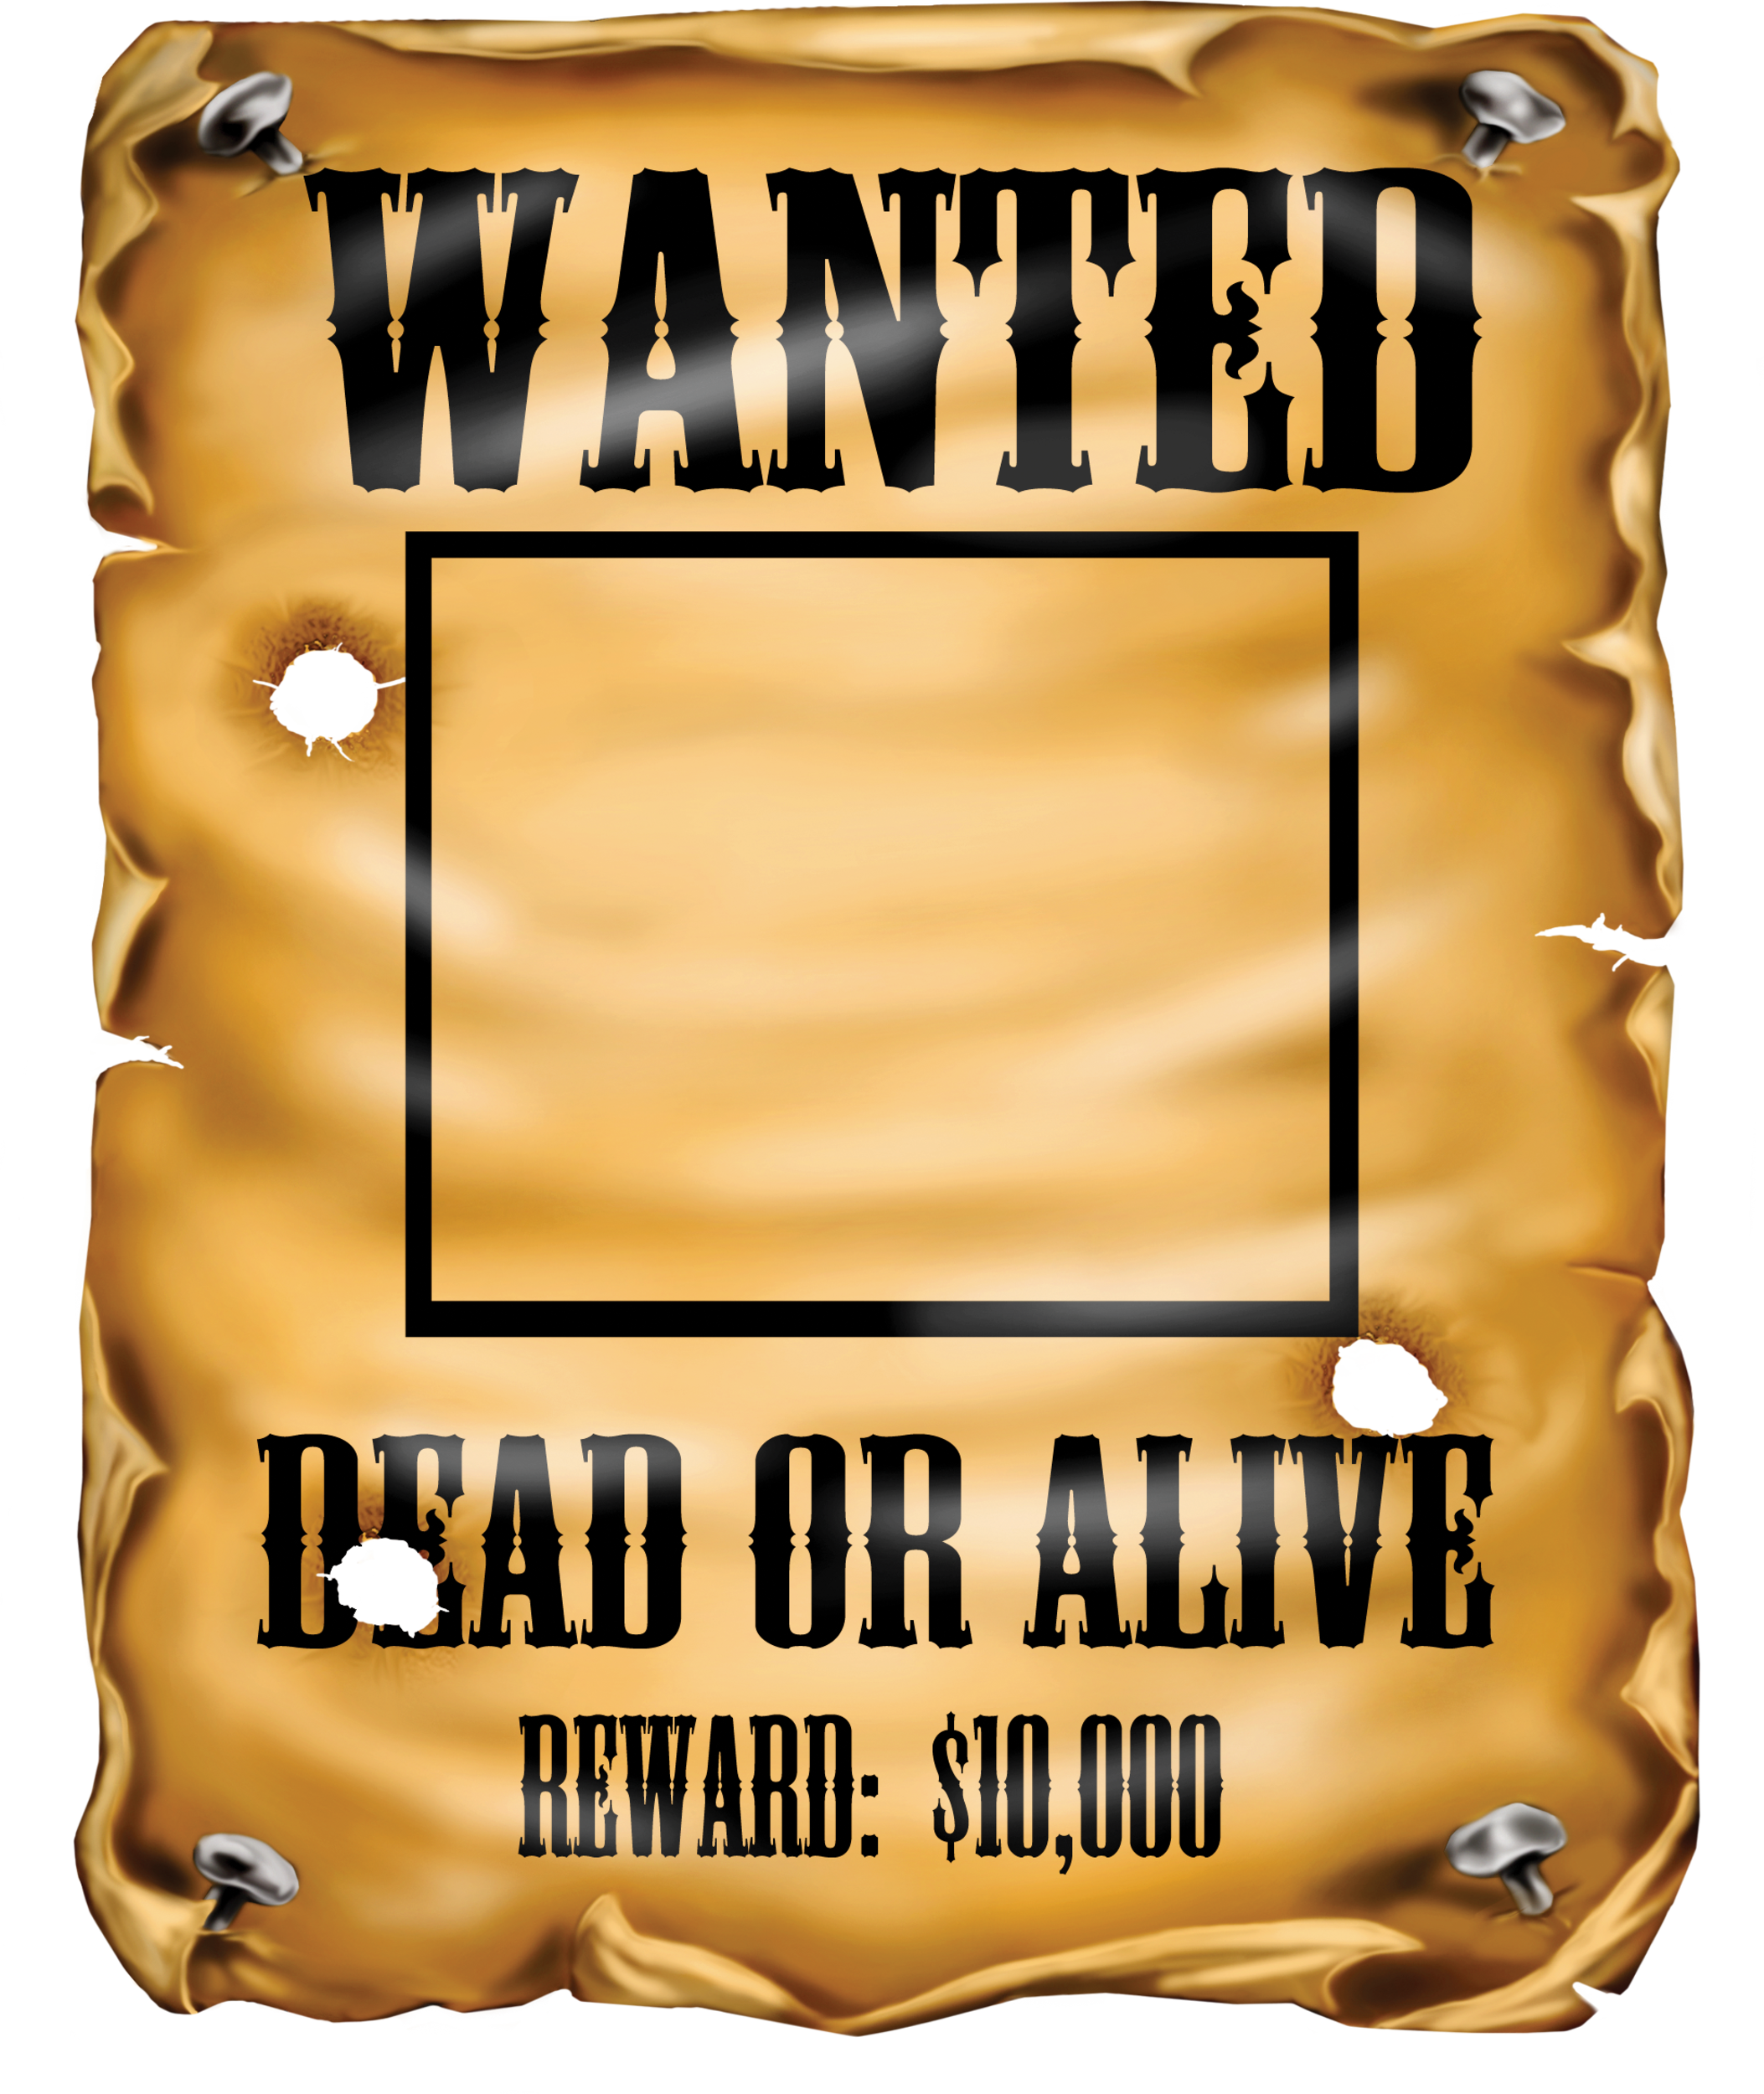 wanted poster on Pinterest .